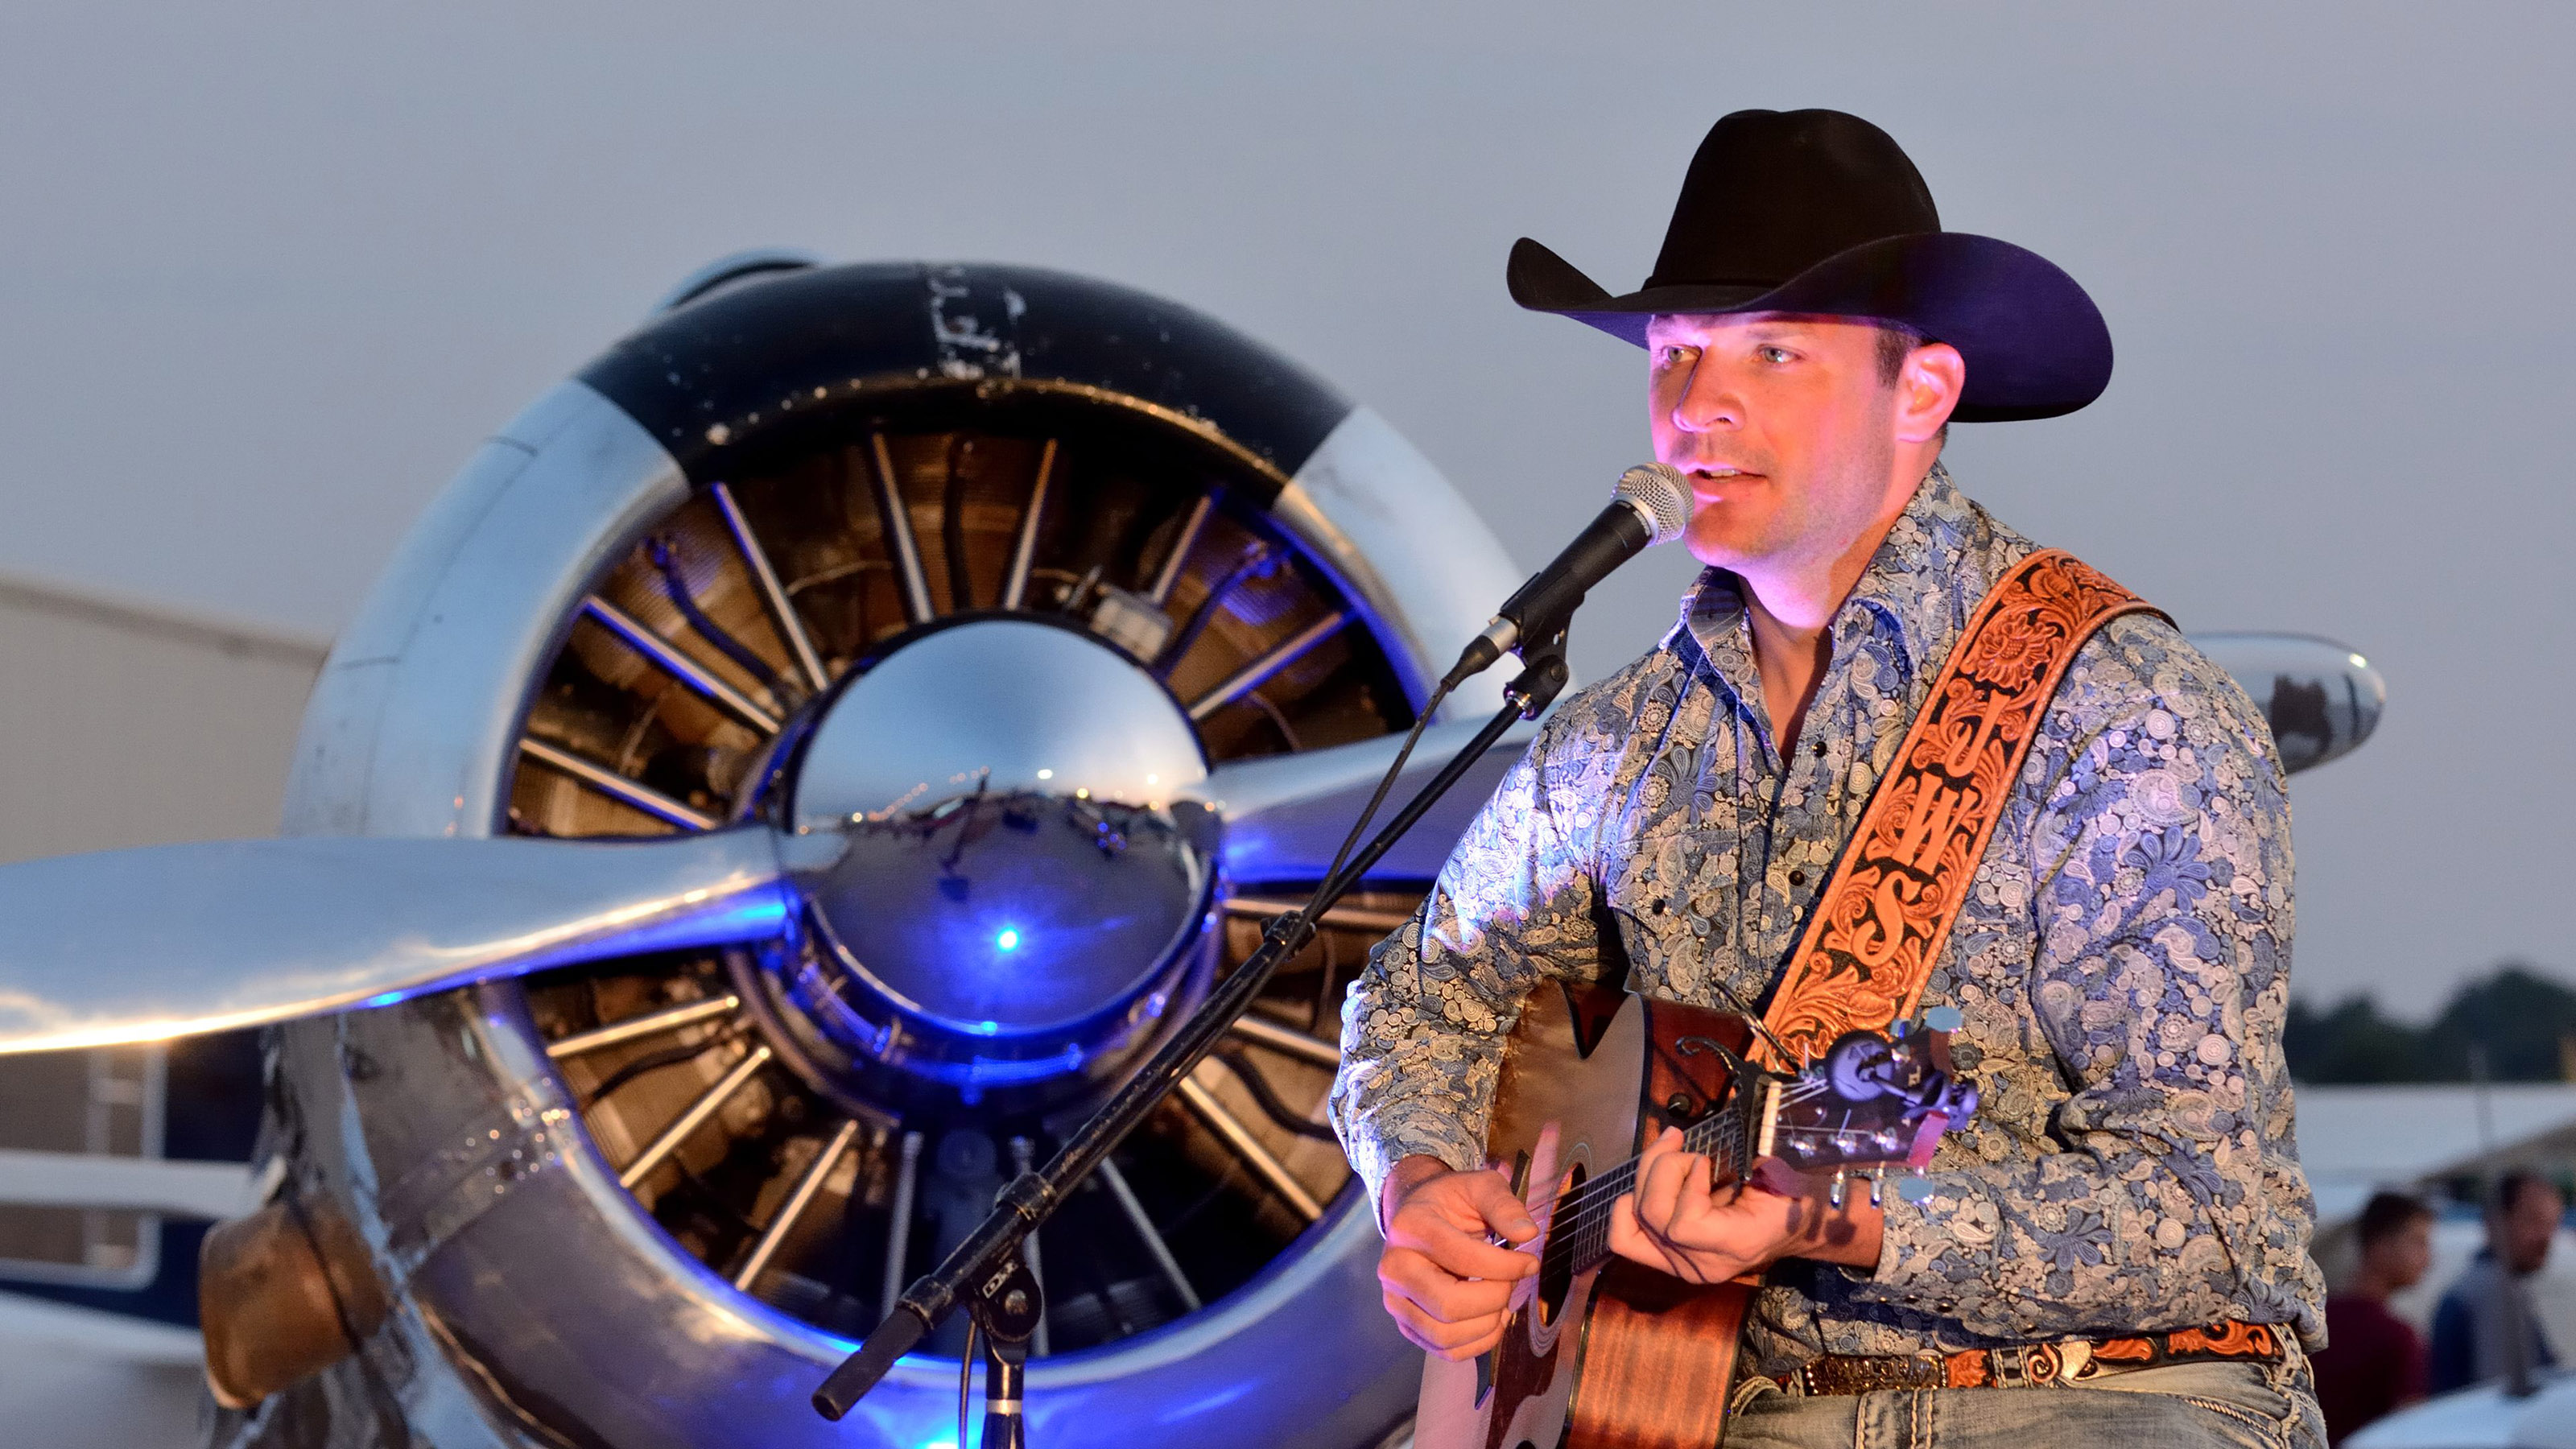 Country singer John Wayne Schulz--who also is a pilot and an active flight instructor--entertains the crowd during Friday evening's Barnstormers Party at AOPA's 2017 Norman Fly-In. A North American T-6 serves as the backdrop. Photo by Mike Collins.